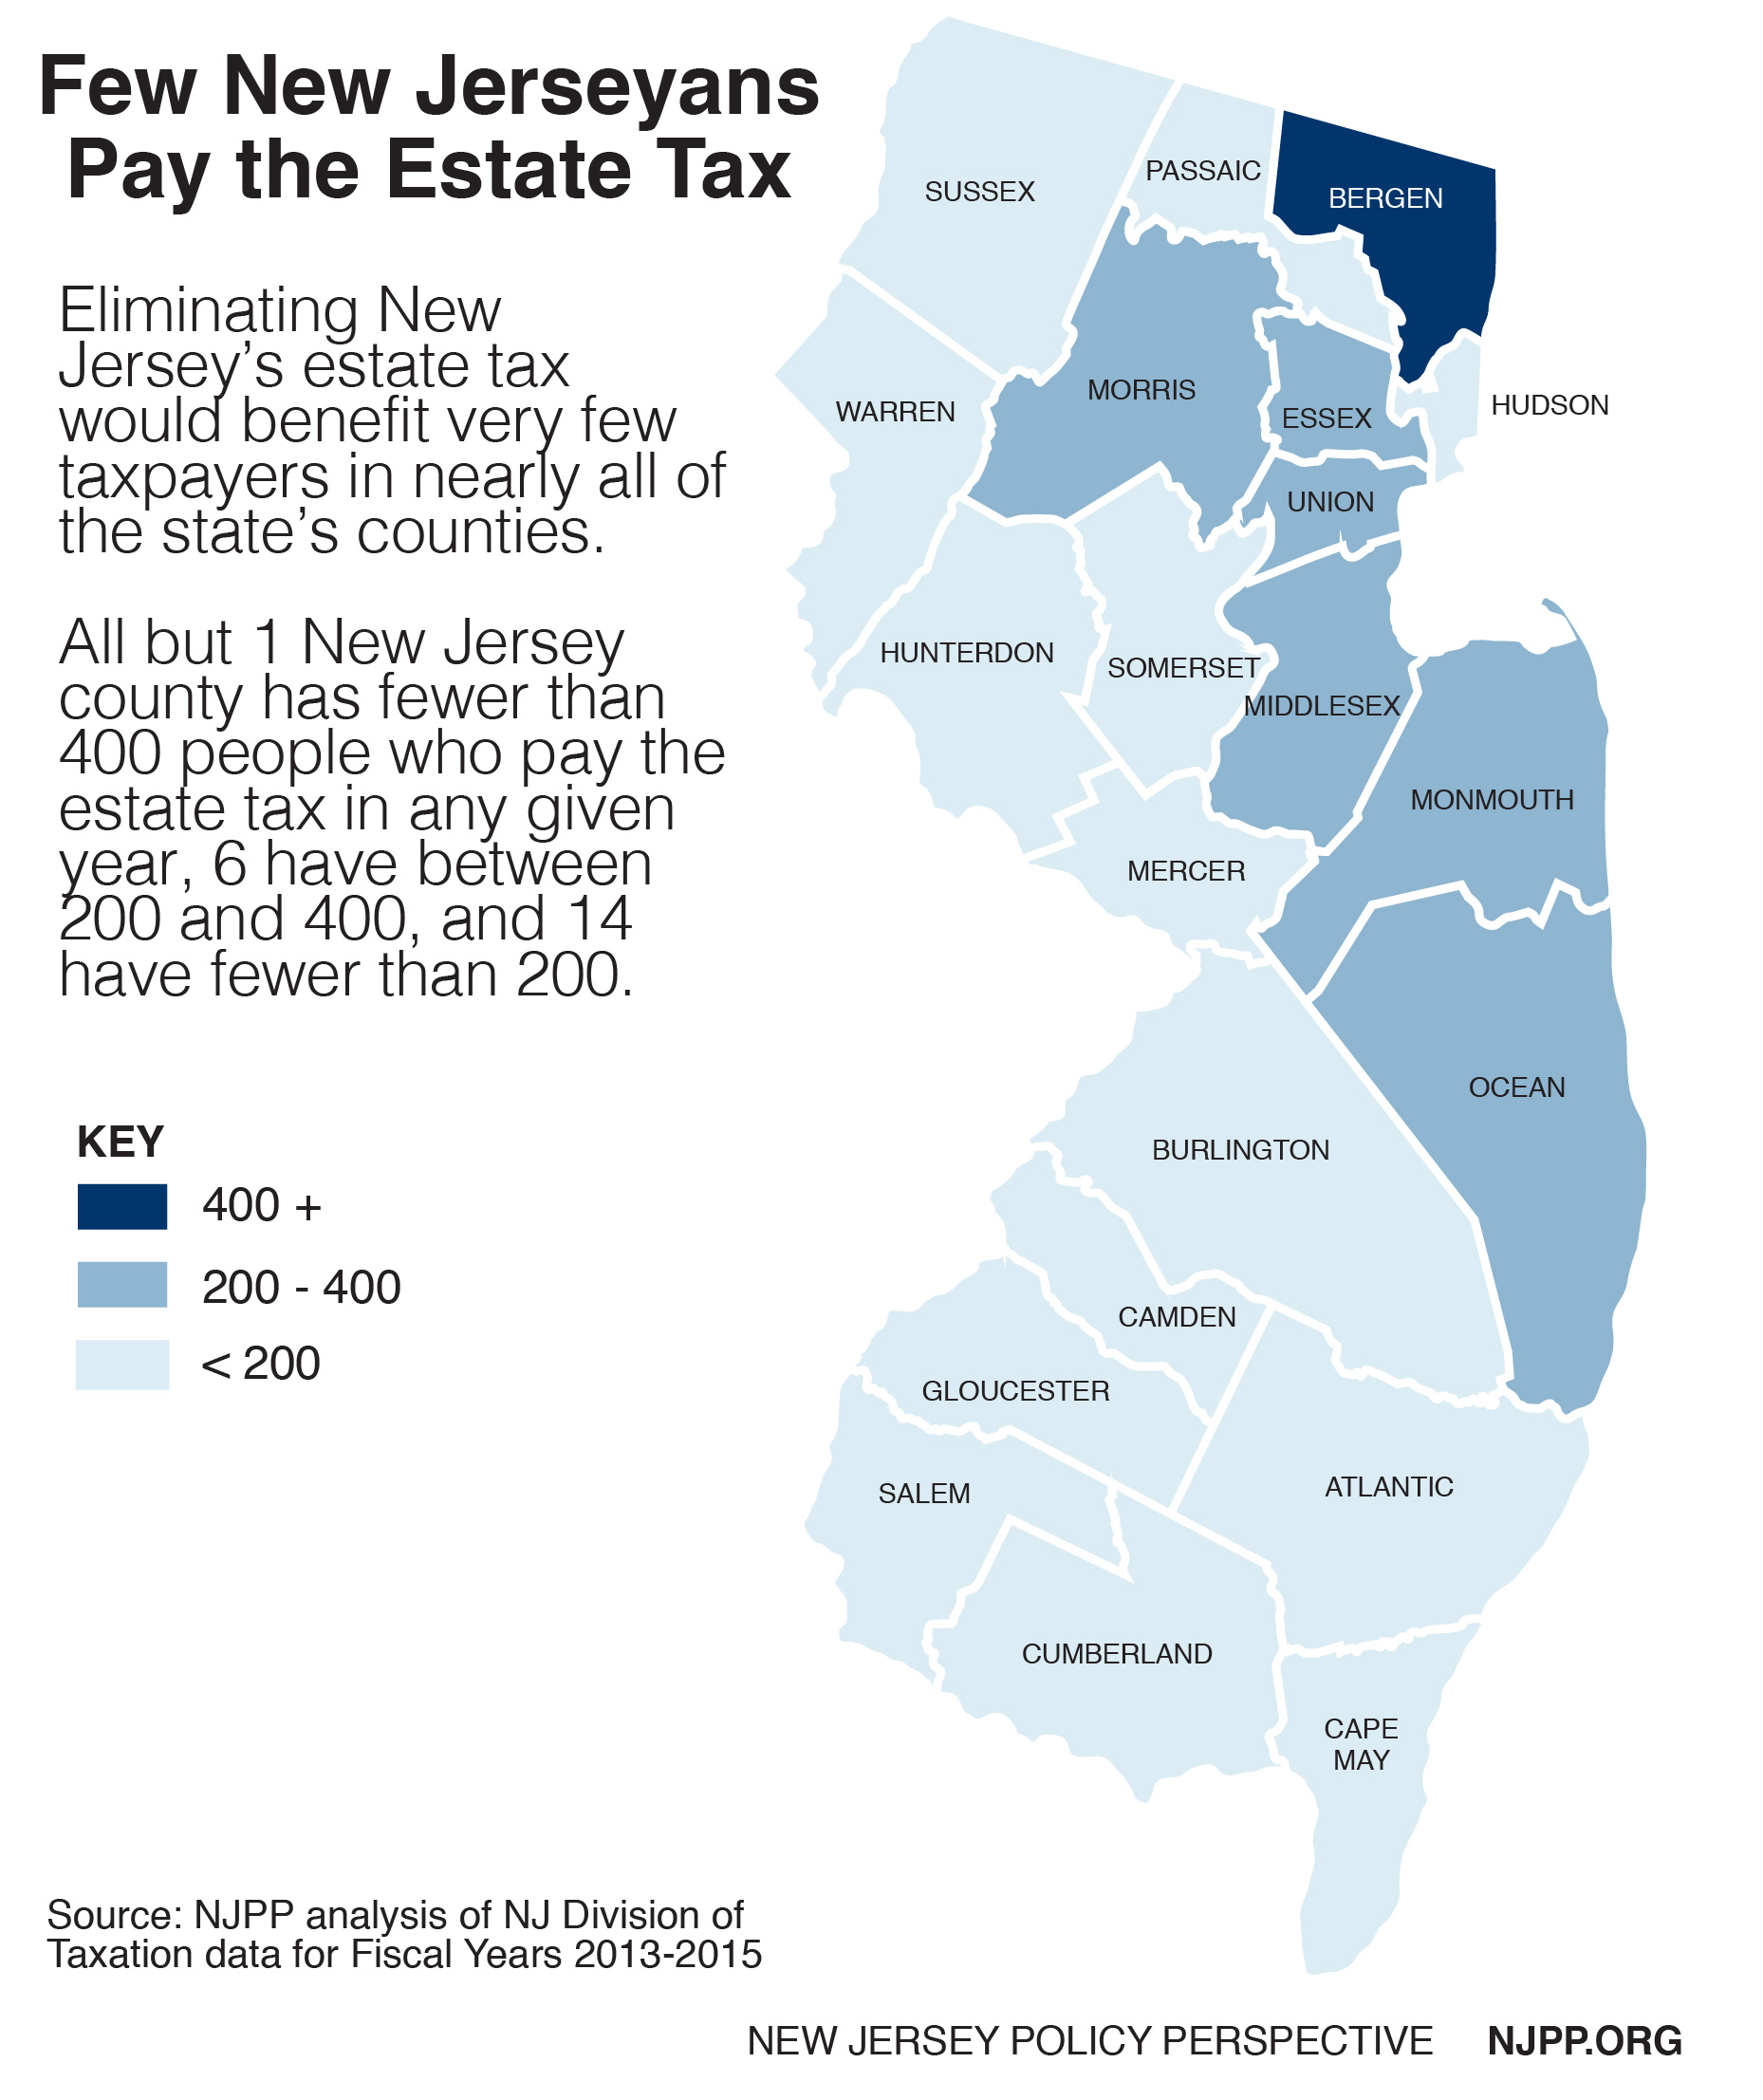 fast-facts-in-every-county-very-few-new-jerseyans-owe-estate-tax